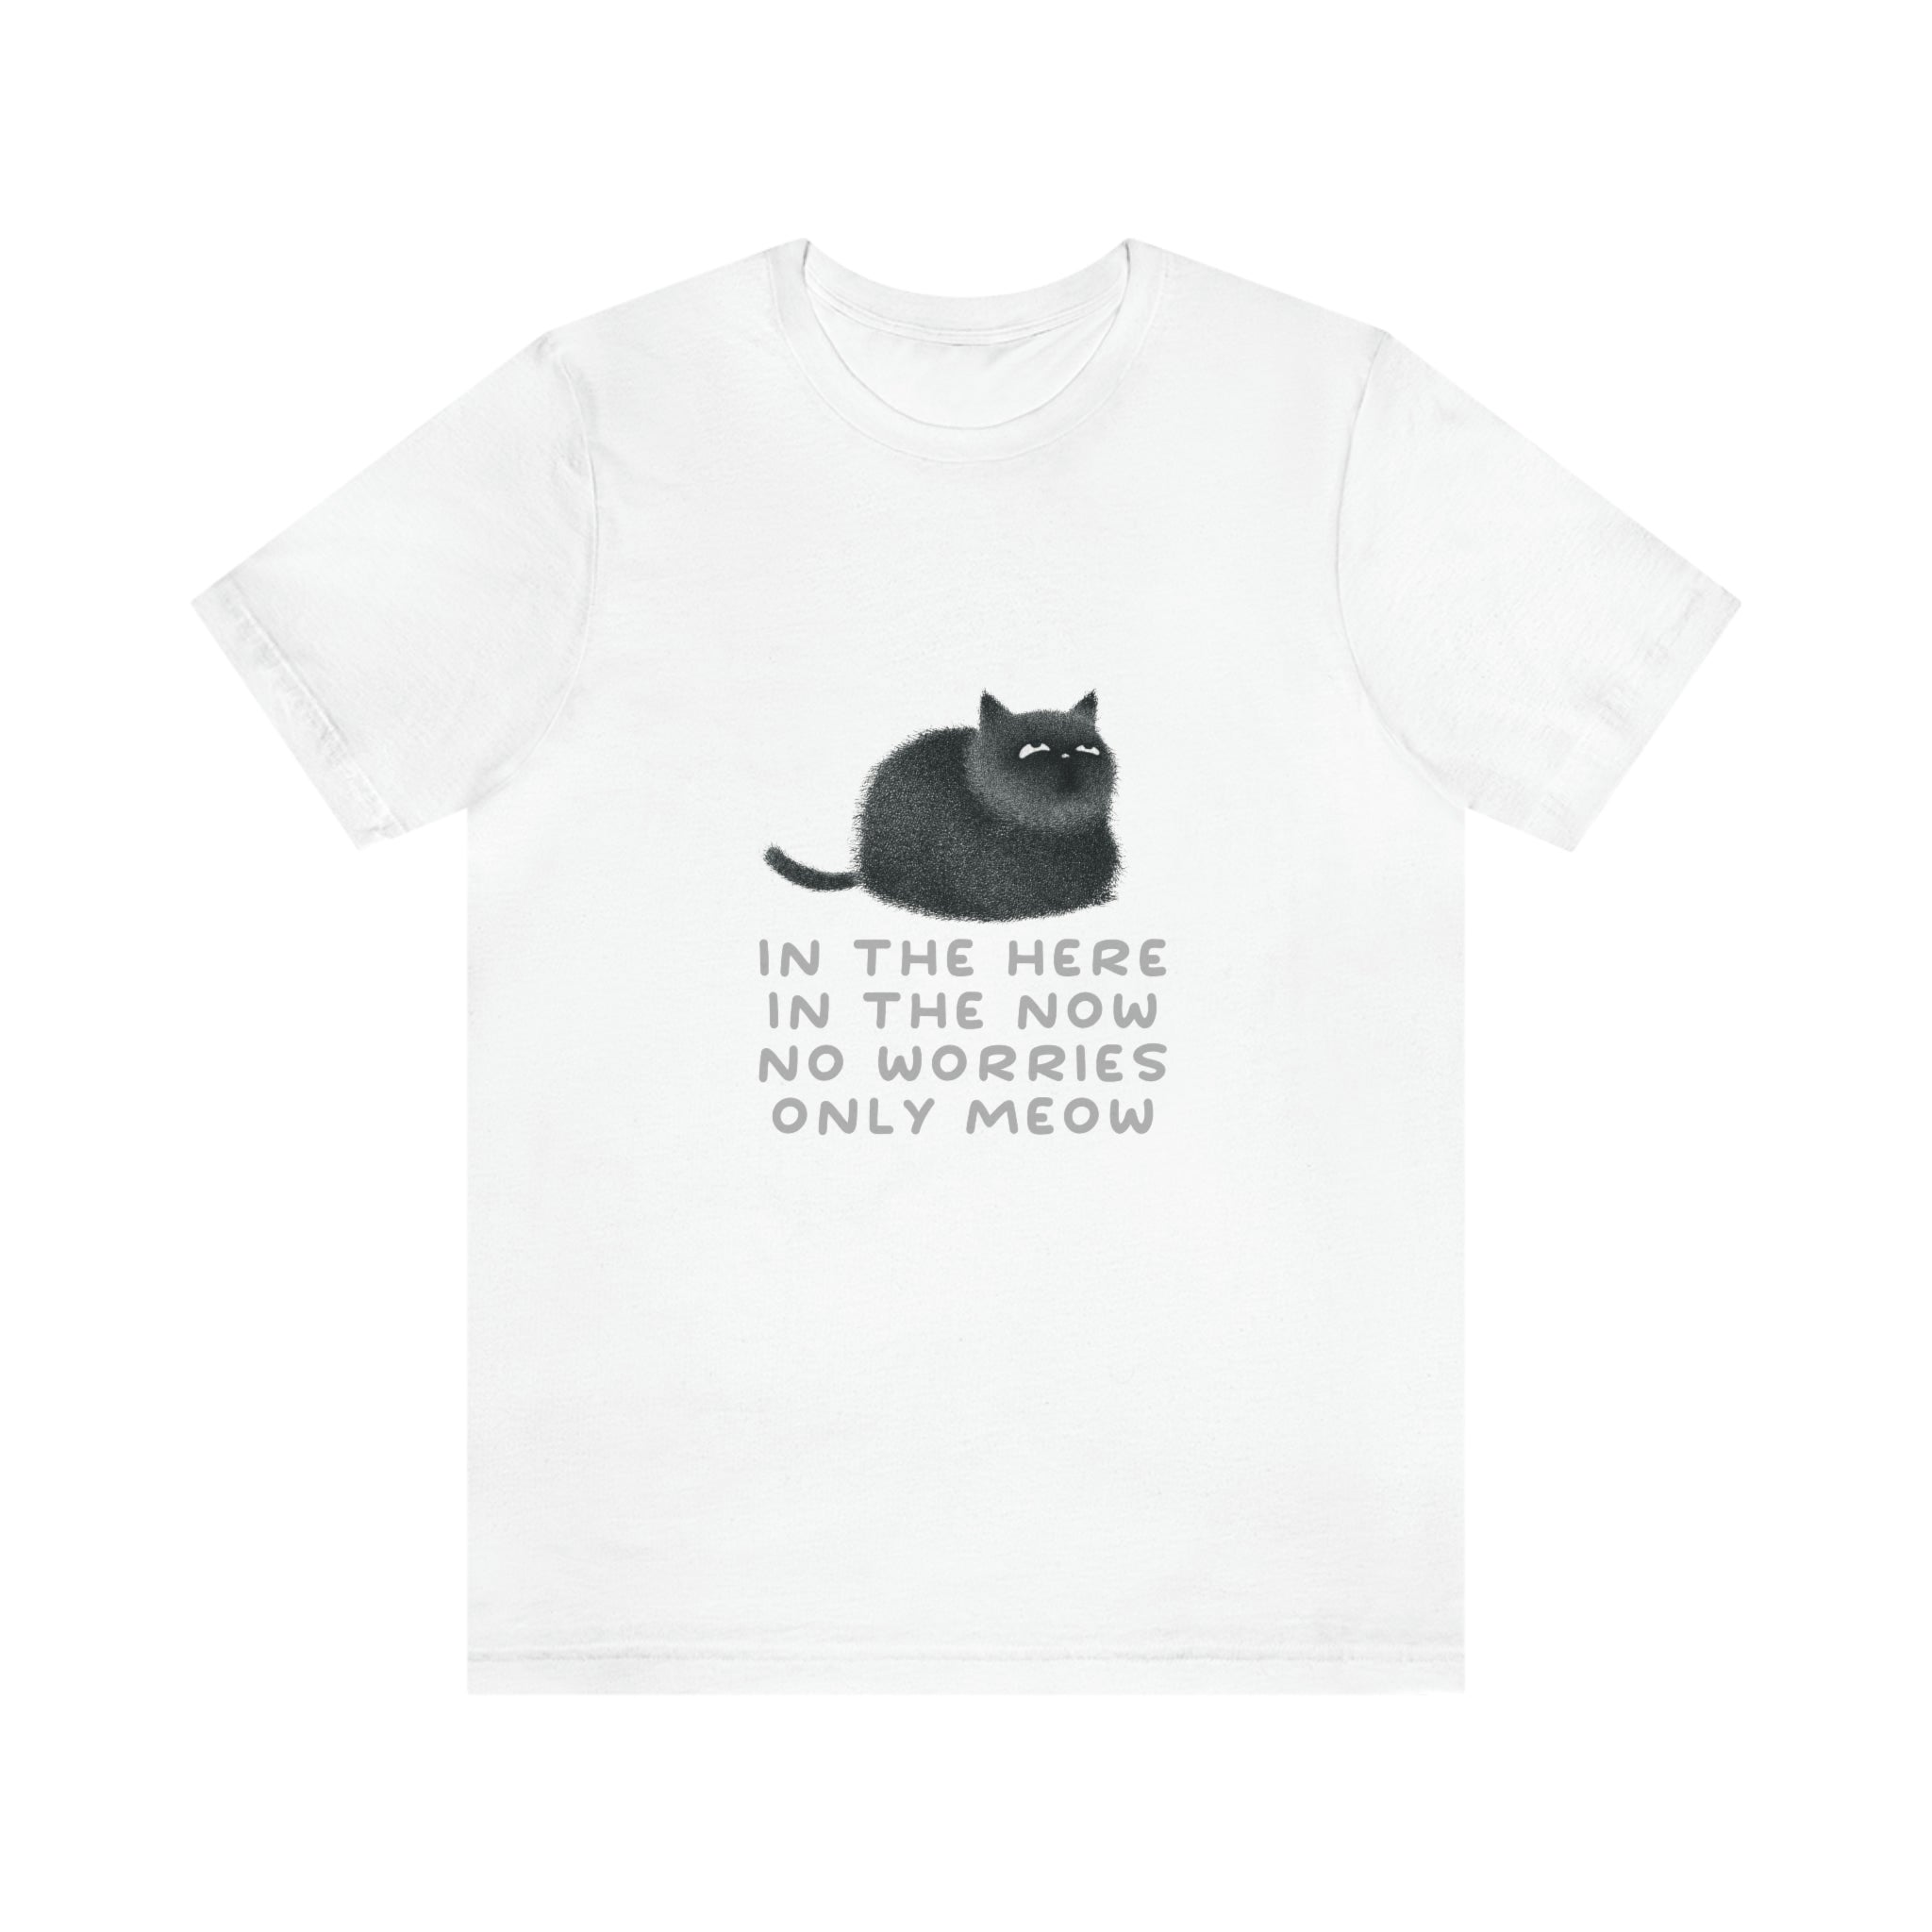 Only Meow : Unisex 100% Cotton T-Shirt